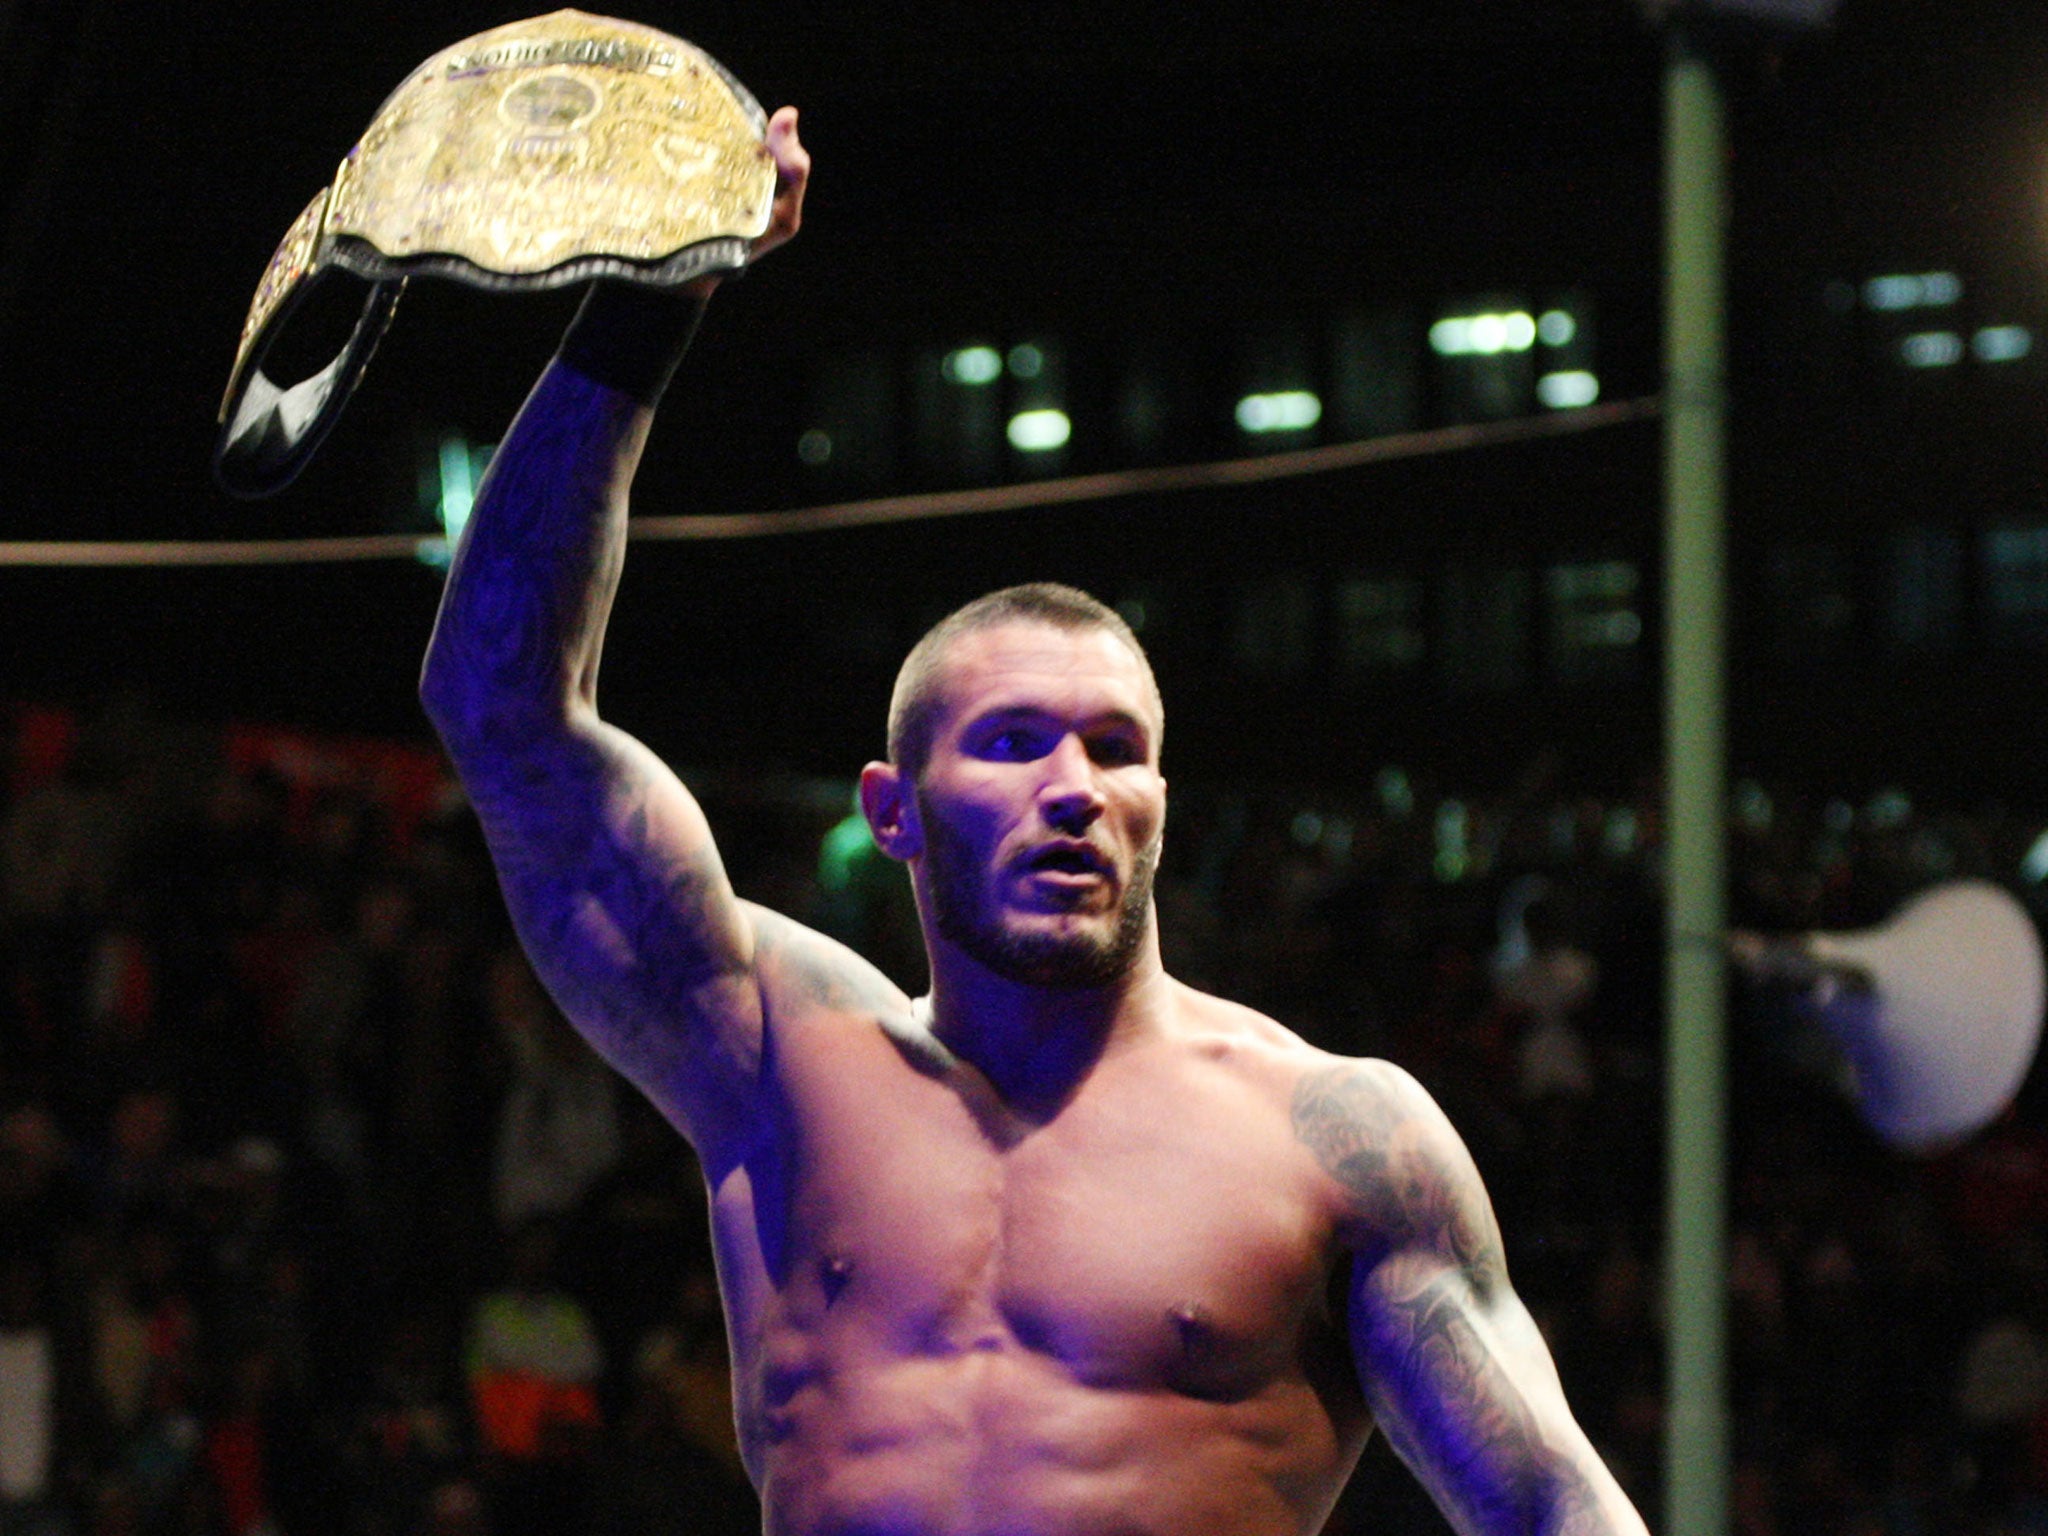 Randy Orton will defend his WWE World Heavyweight Championship against five other men at the Elimination Chamber